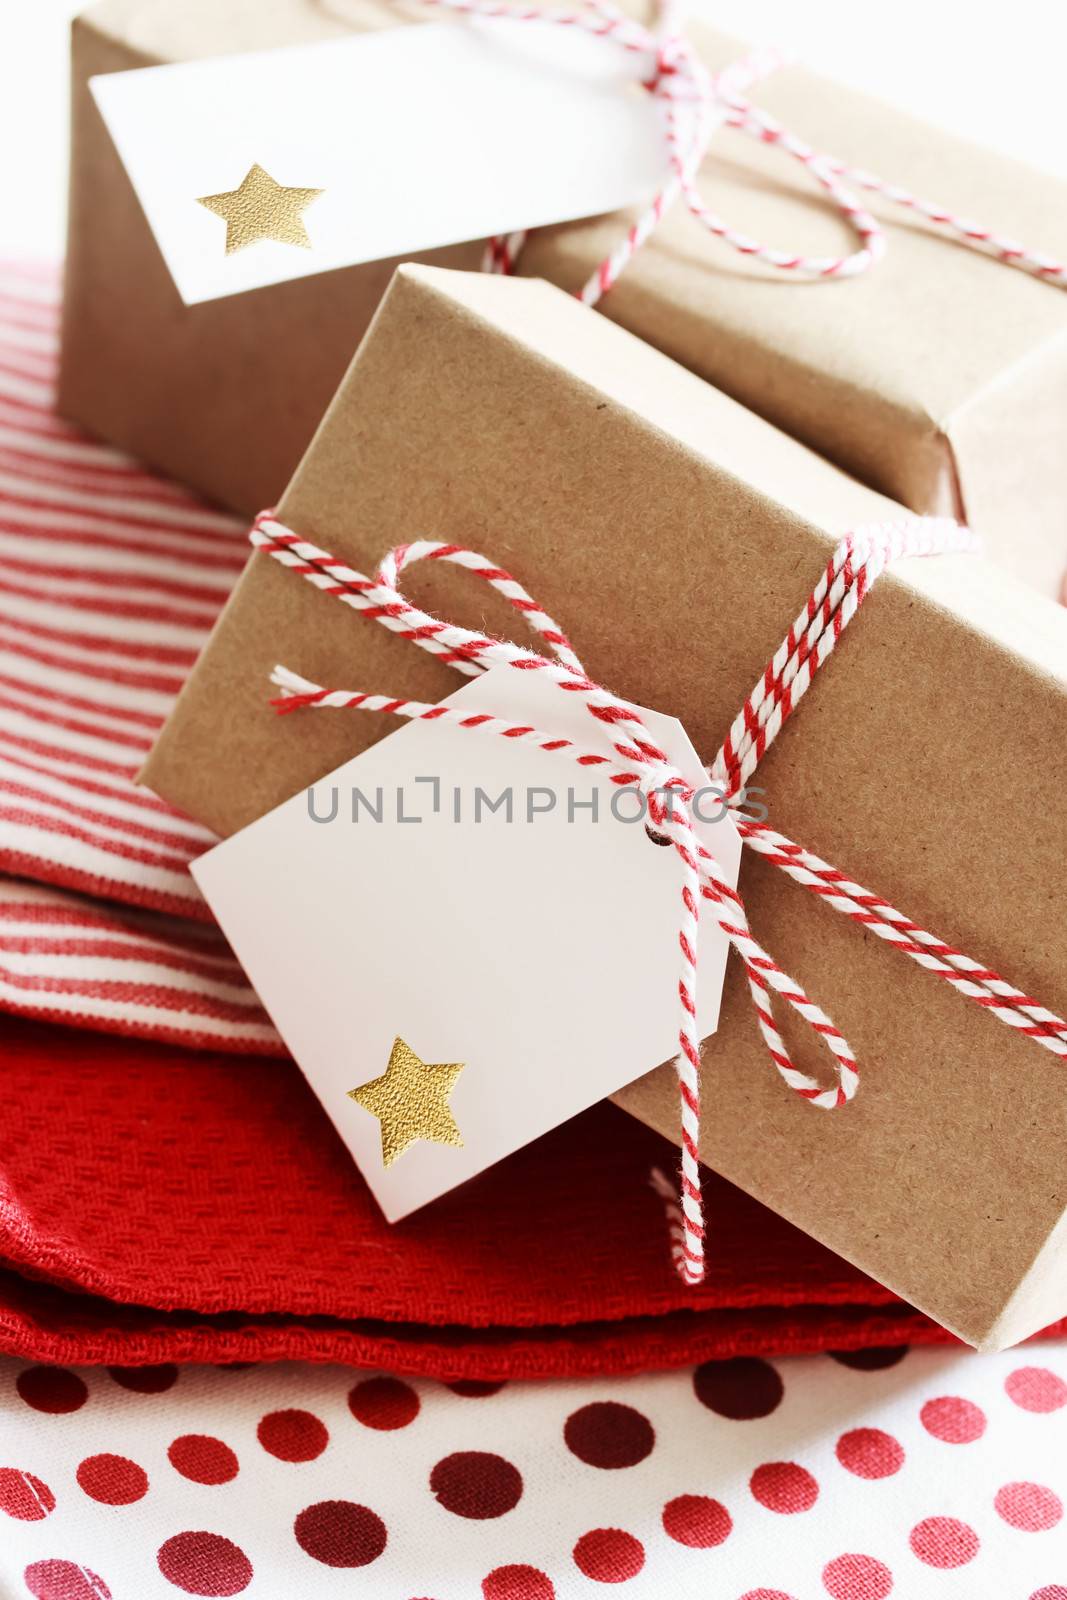 Handmade present boxes with tags by melpomene